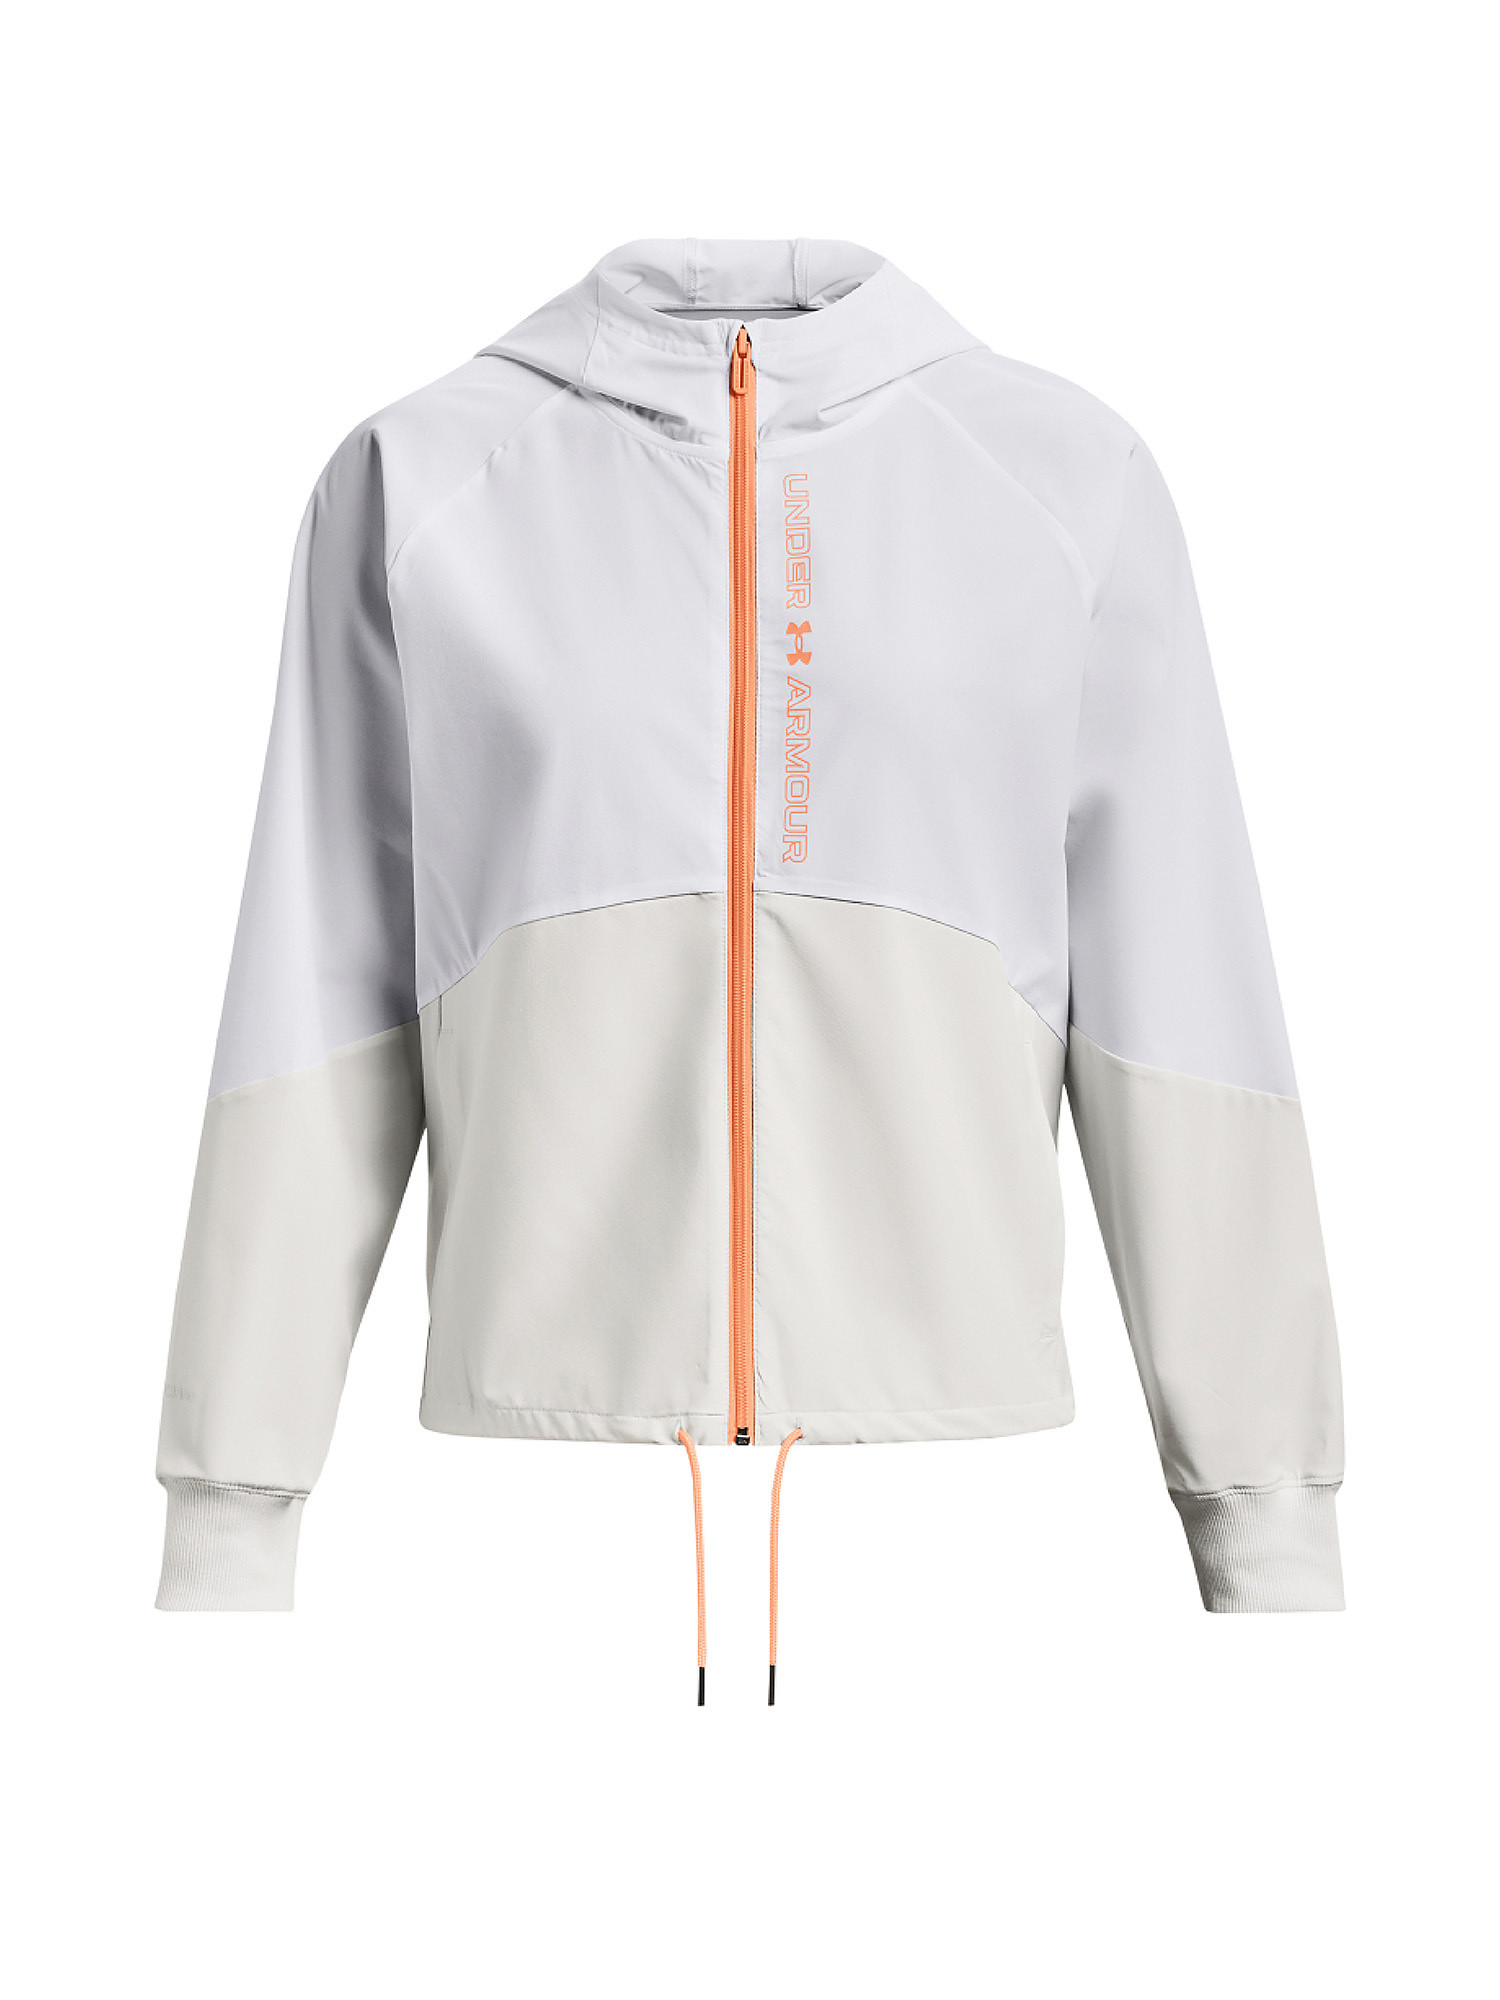 Under Armour - Giacca UA Woven Full-Zip, Bianco, large image number 0